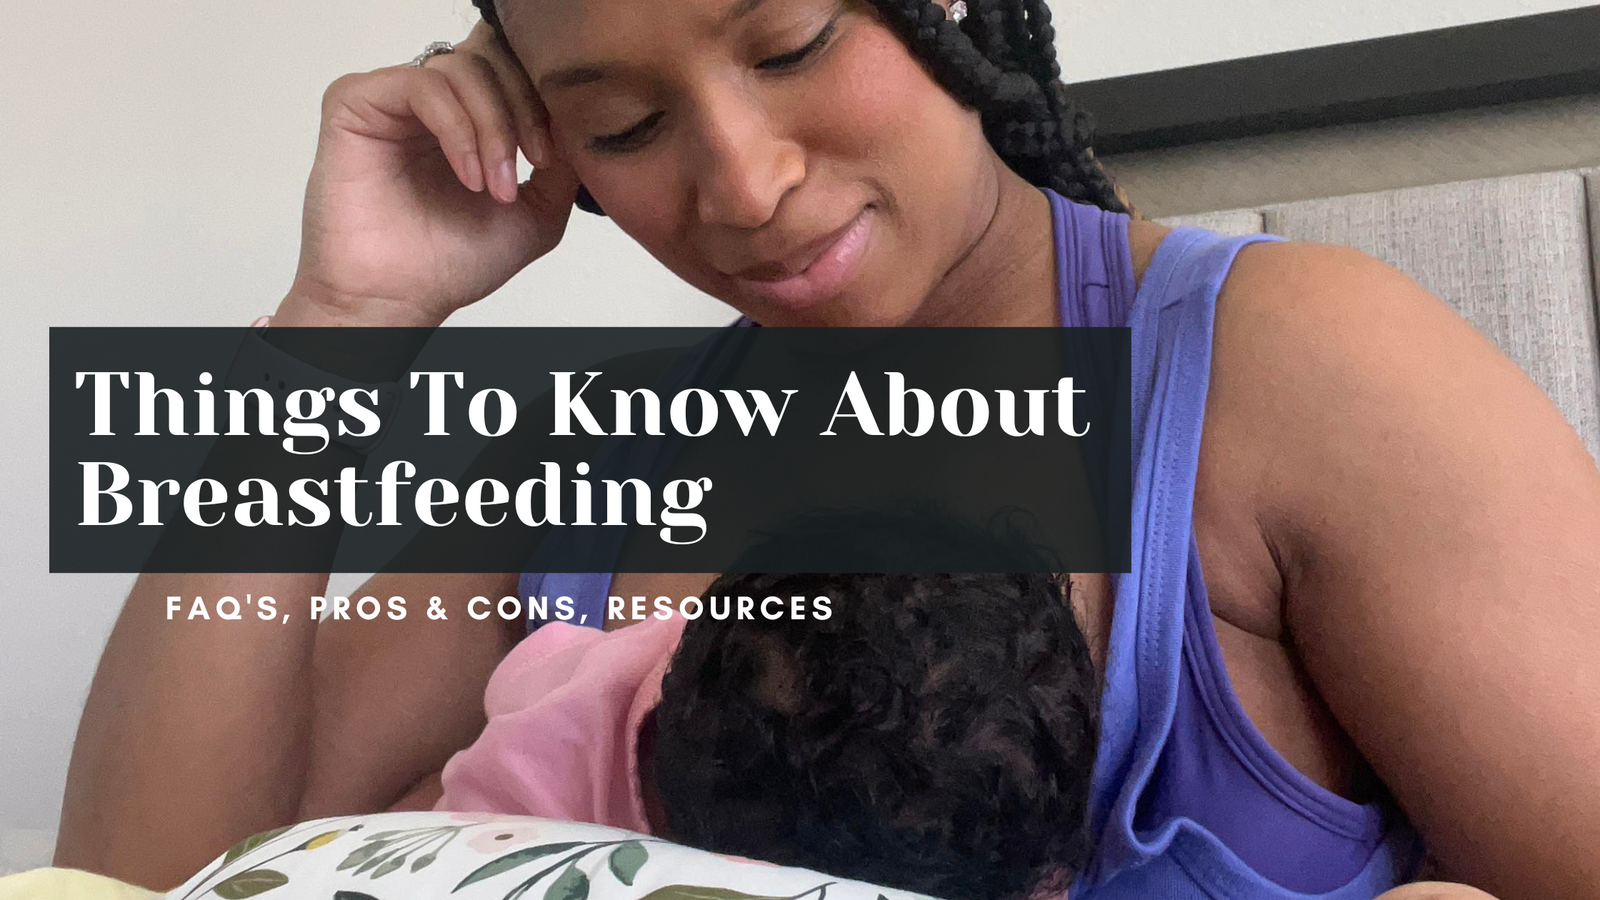 Best Practices For Breastfeeding & Pumping - How To's, FAQ's, and More